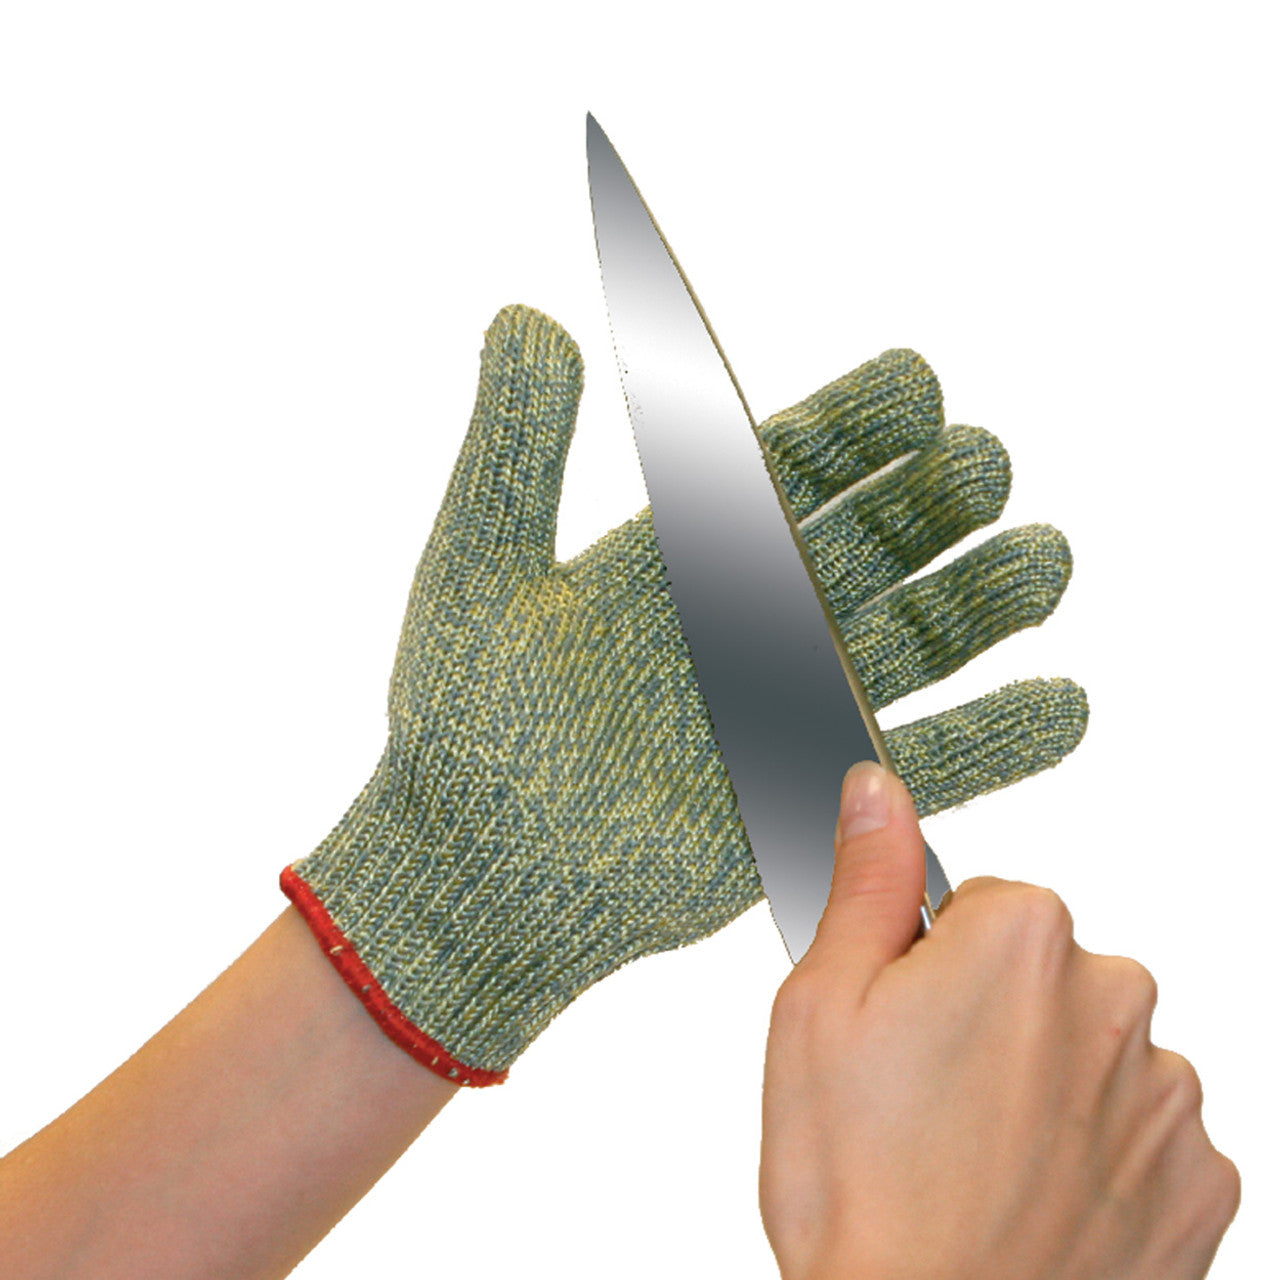 Cut Resistant Gloves - Pair - Ergo Chef Knives